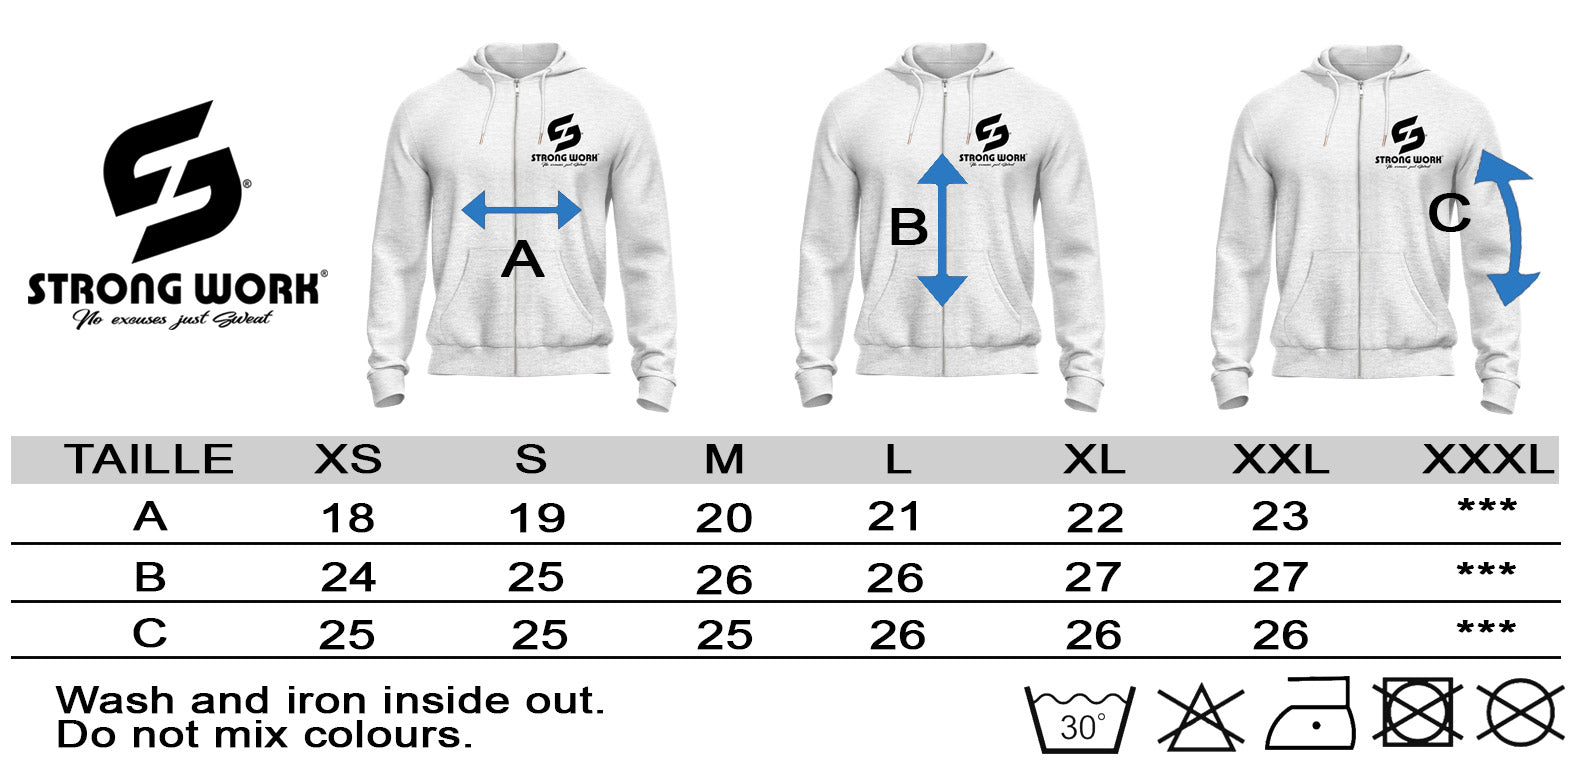 STRONG WORK NEW CLASSIC ZIPPED HOODED SWEATSHIRT FOR WOMEN - SIZE GUIDE